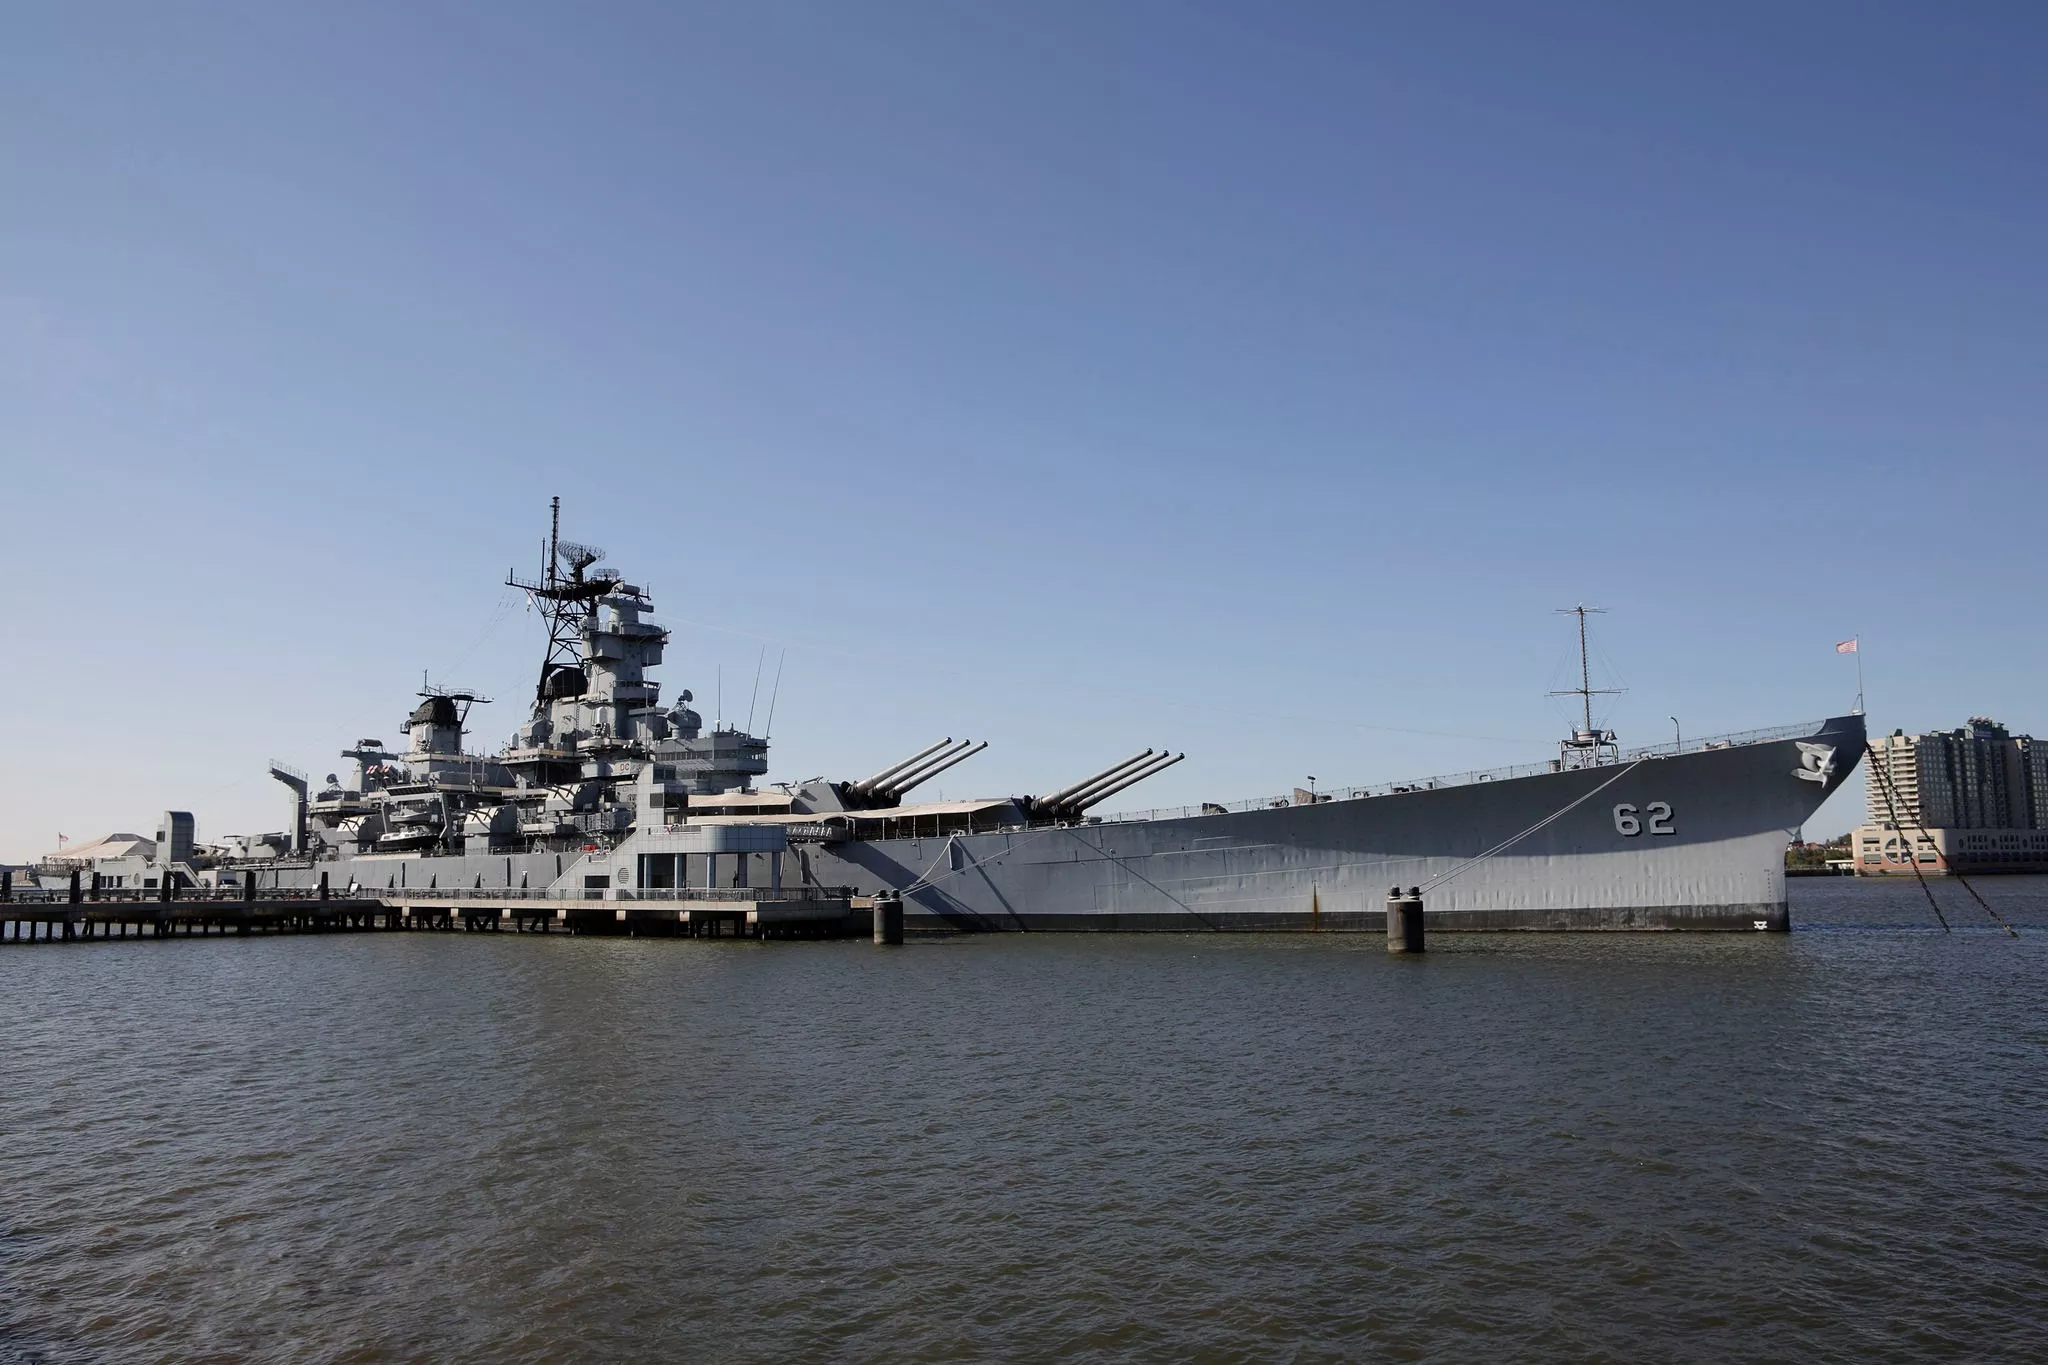 USS New Jersey in USA, North America | Museums - Rated 3.8